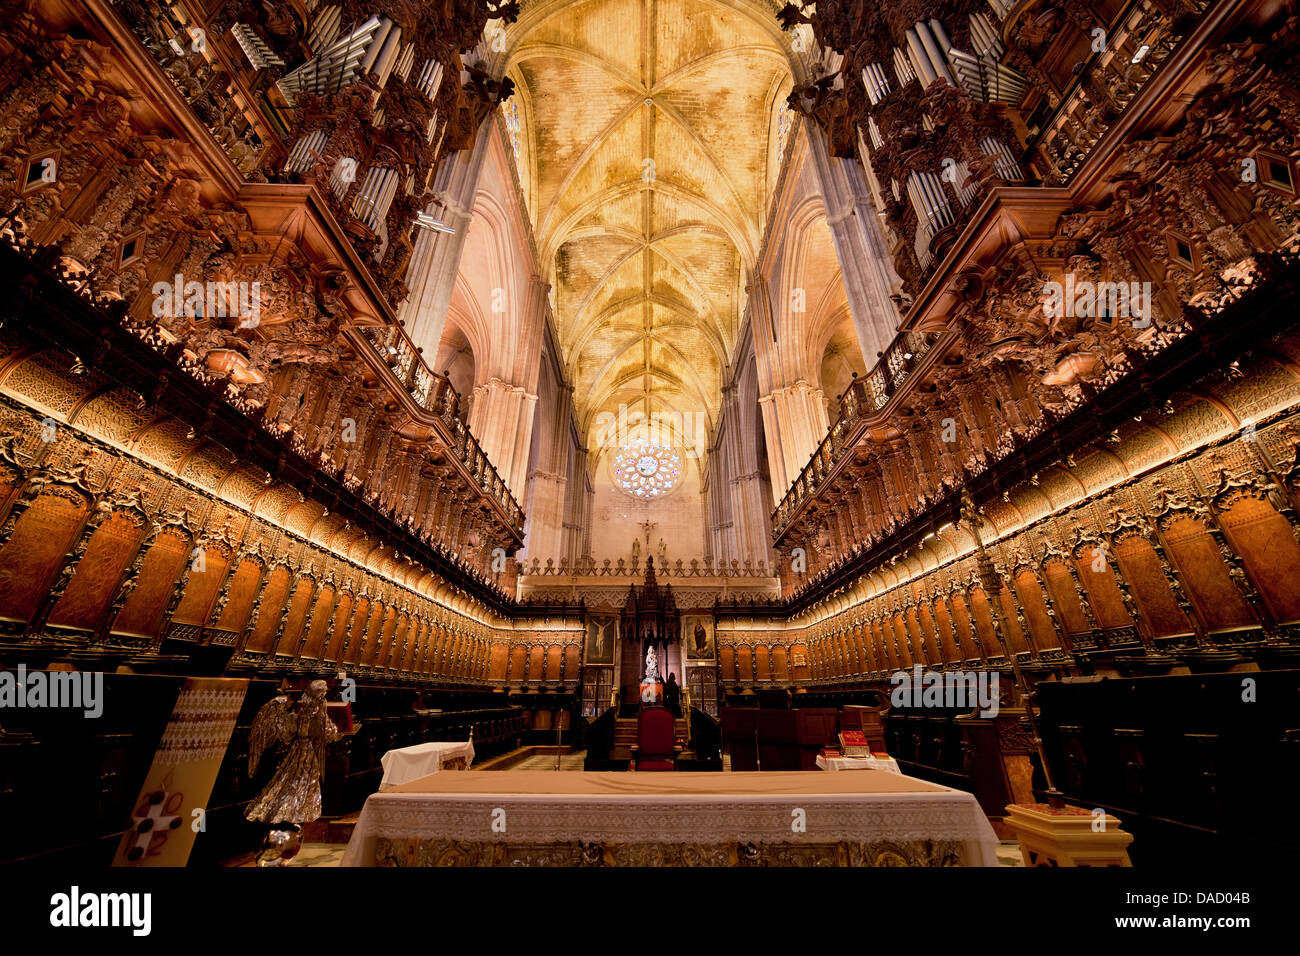 Interior of the Seville Cathedral, pipe organ, choir stalls, Gothic vault in Spain, Andalusia region. Stock Photo